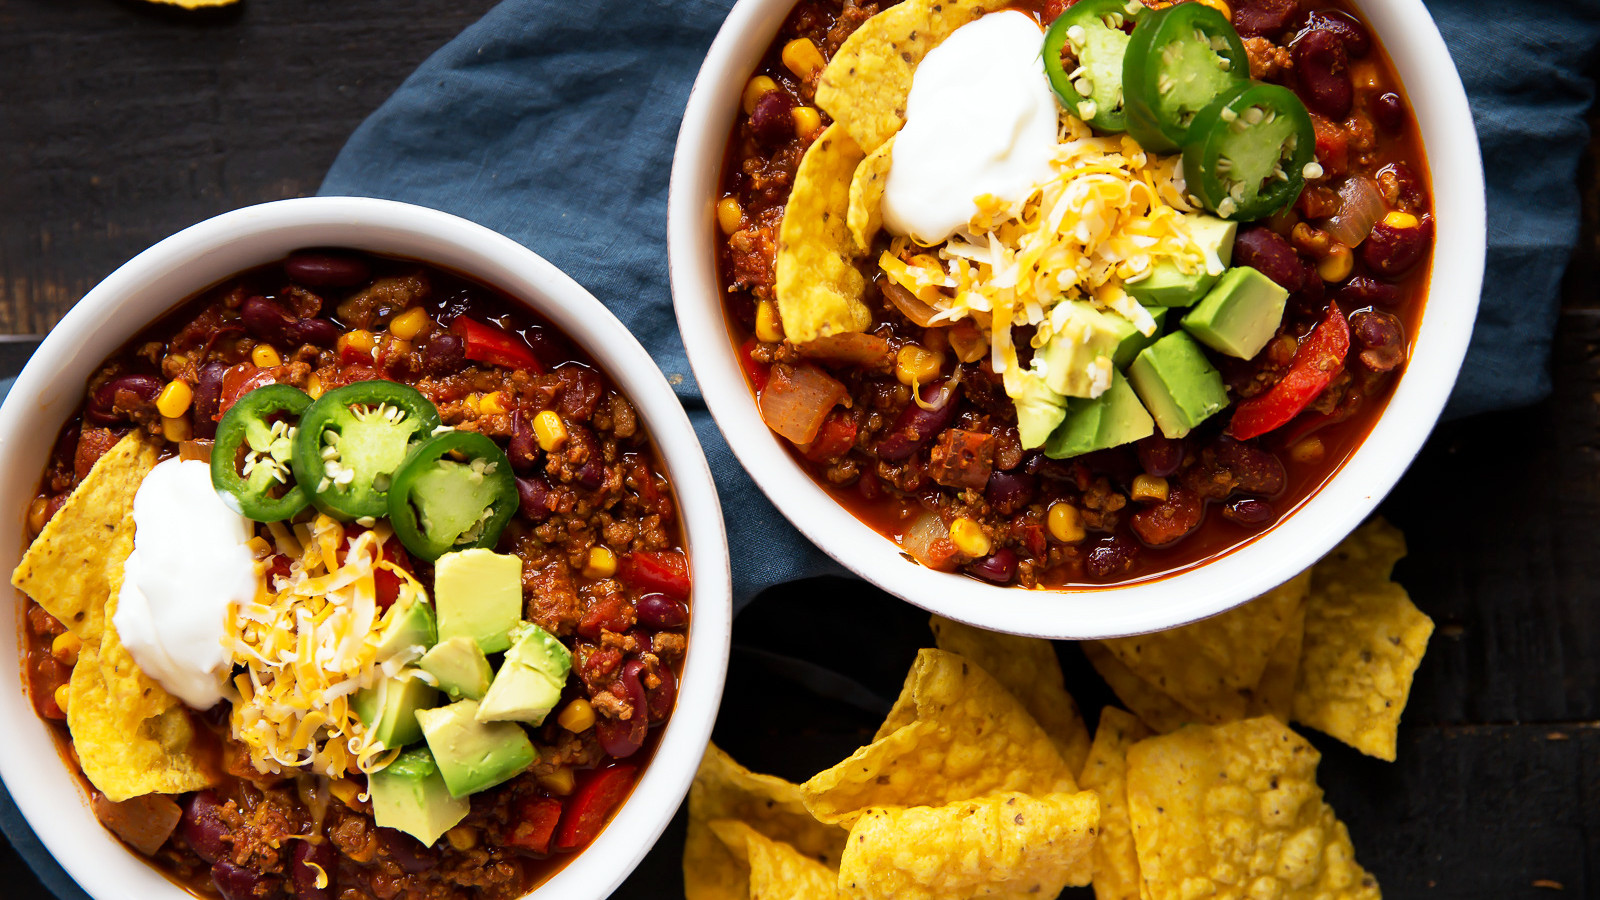 Slow Cooker Super Bowl Recipes
 17 Slow Cooker Super Bowl Chili Recipes to Get You Through